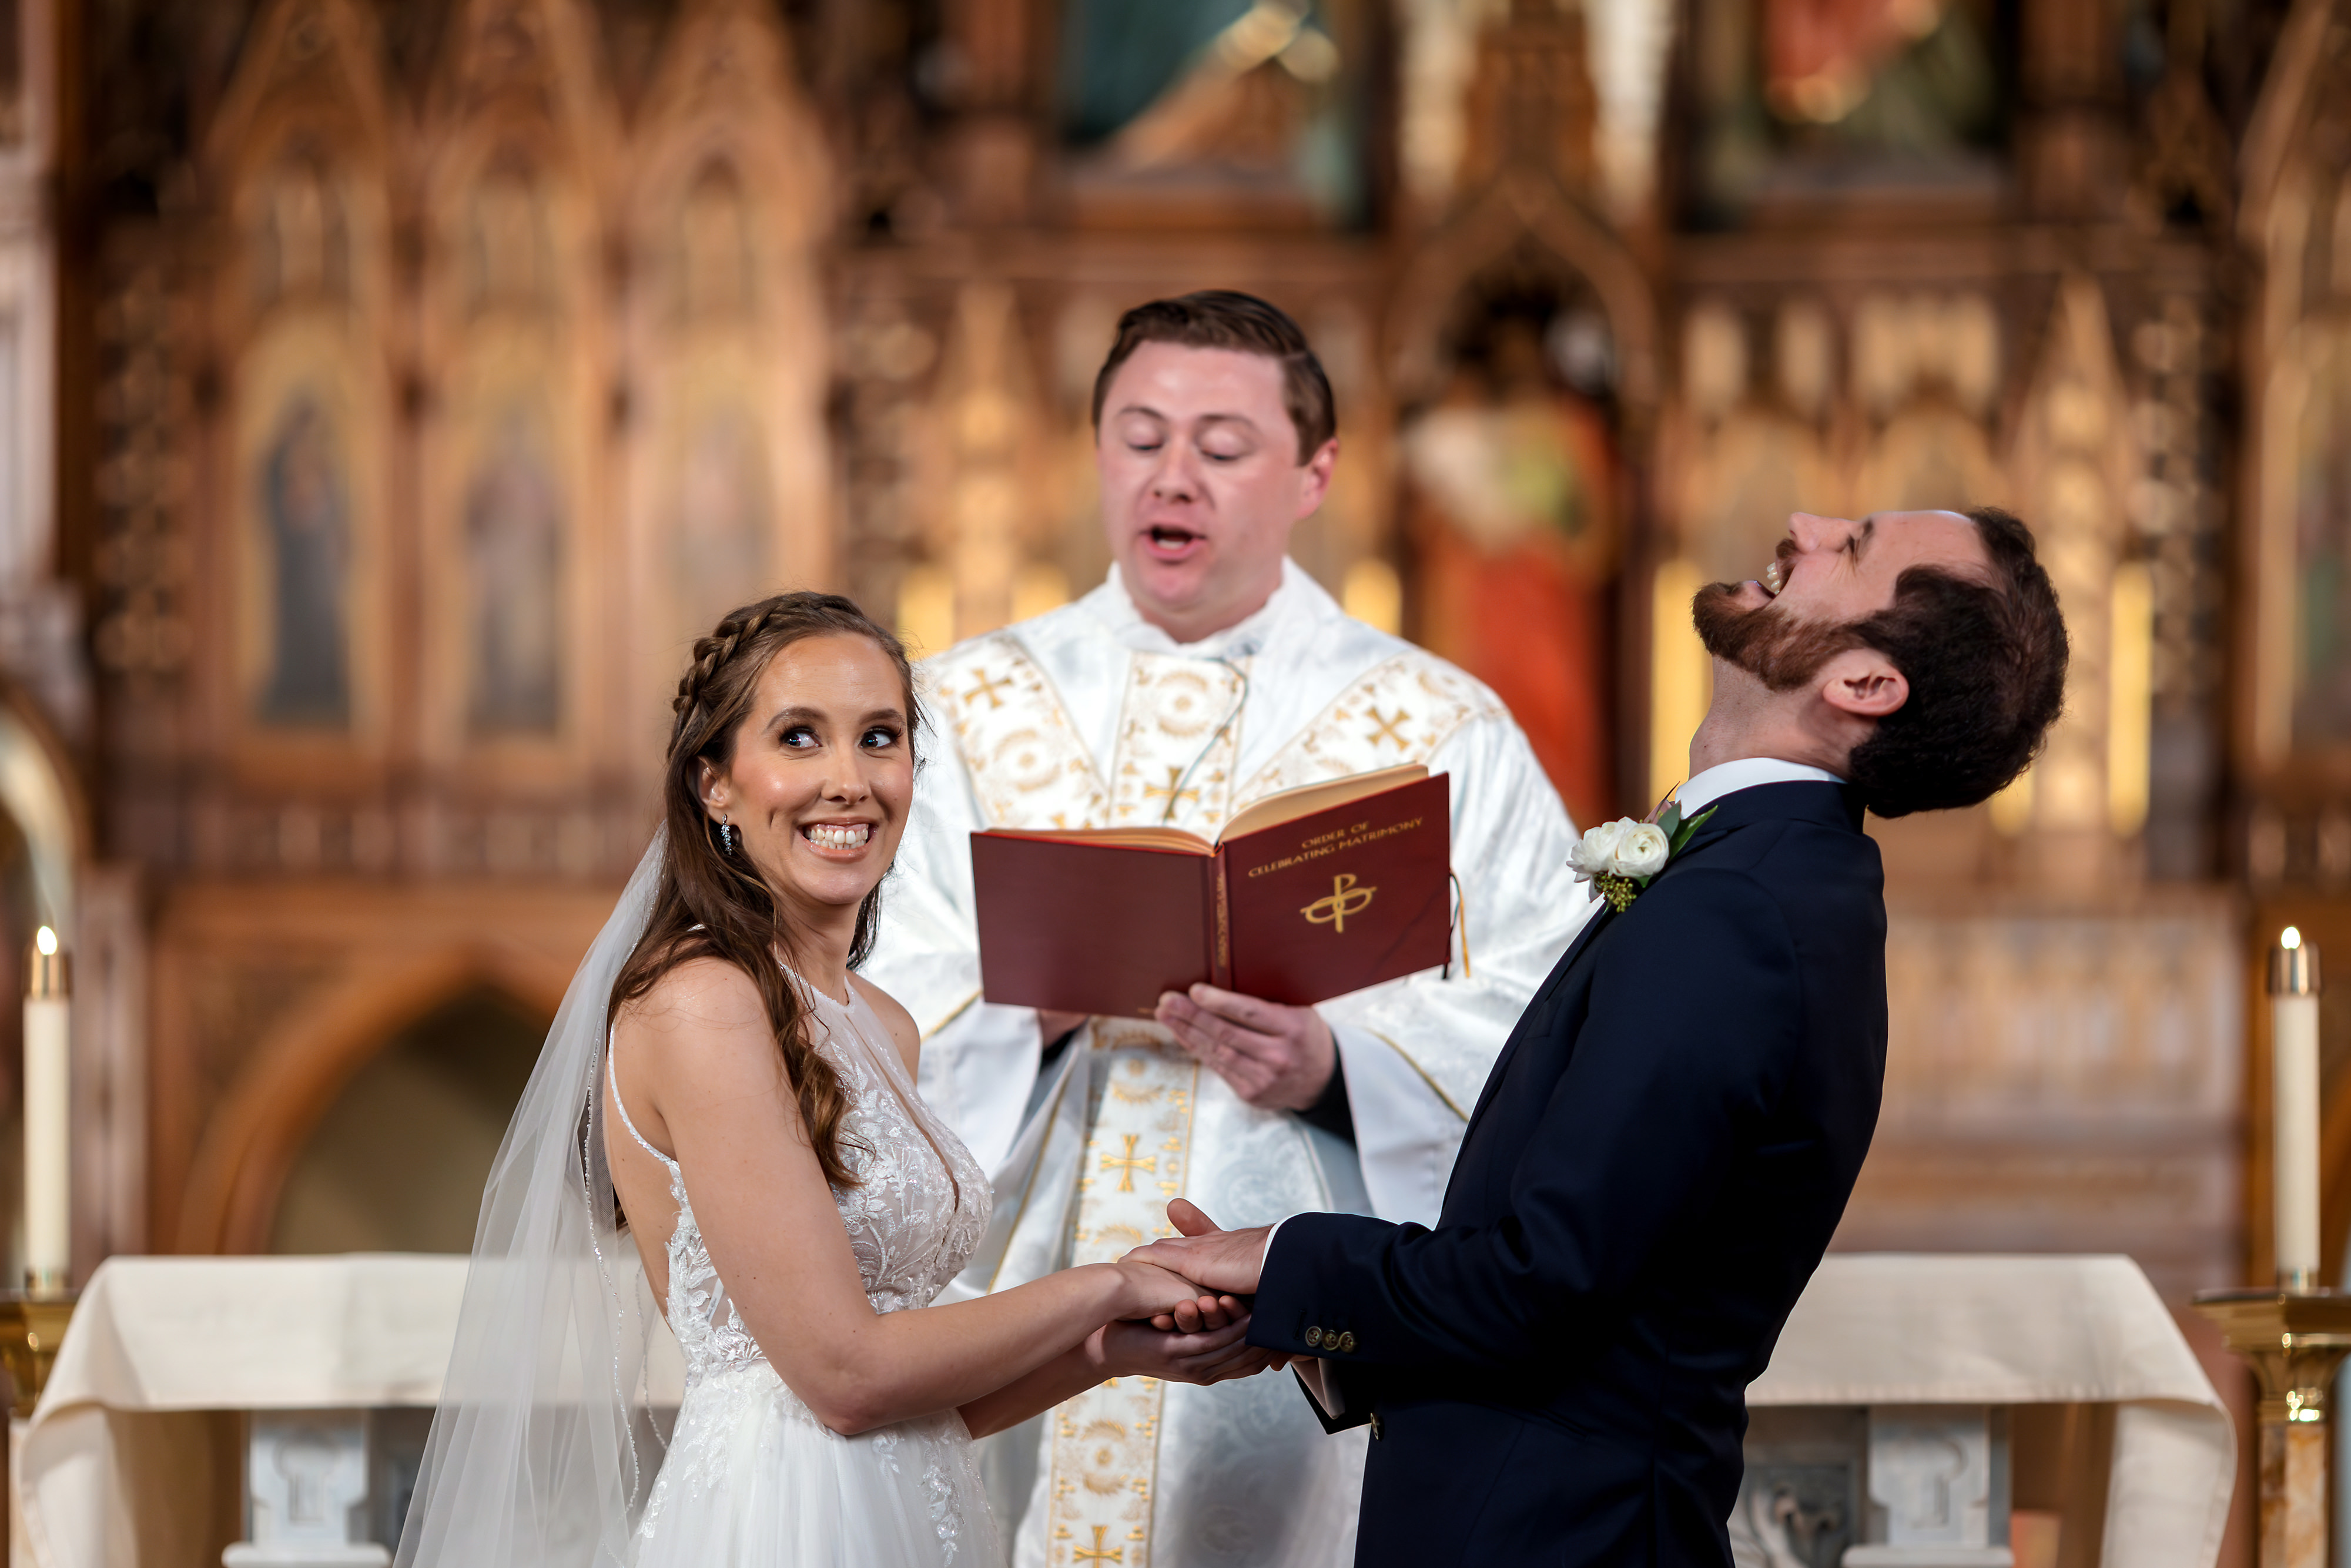 Bride and groom laugh while exchanging vows during wedding ceremony at  St. Joseph Catholic Church in Chicago